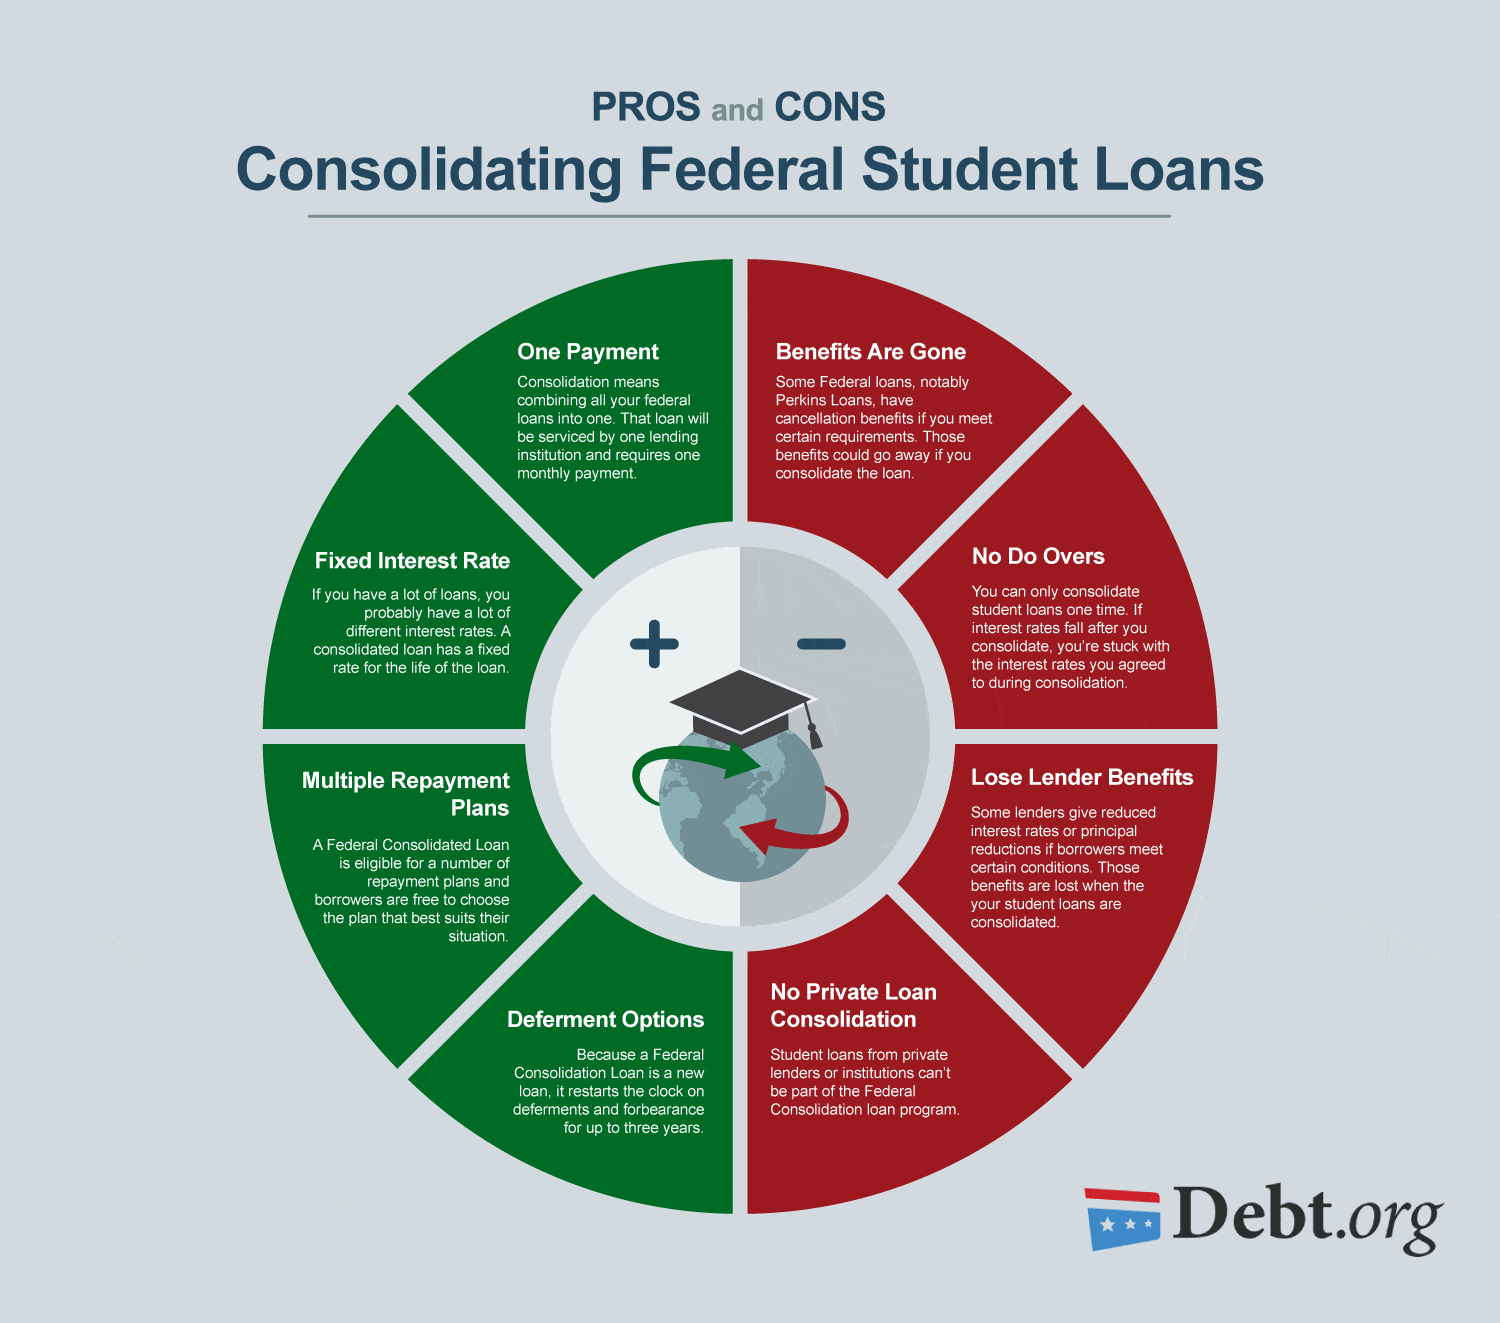 Pros and Cons of Student Loan Consolidation for Federal Loans